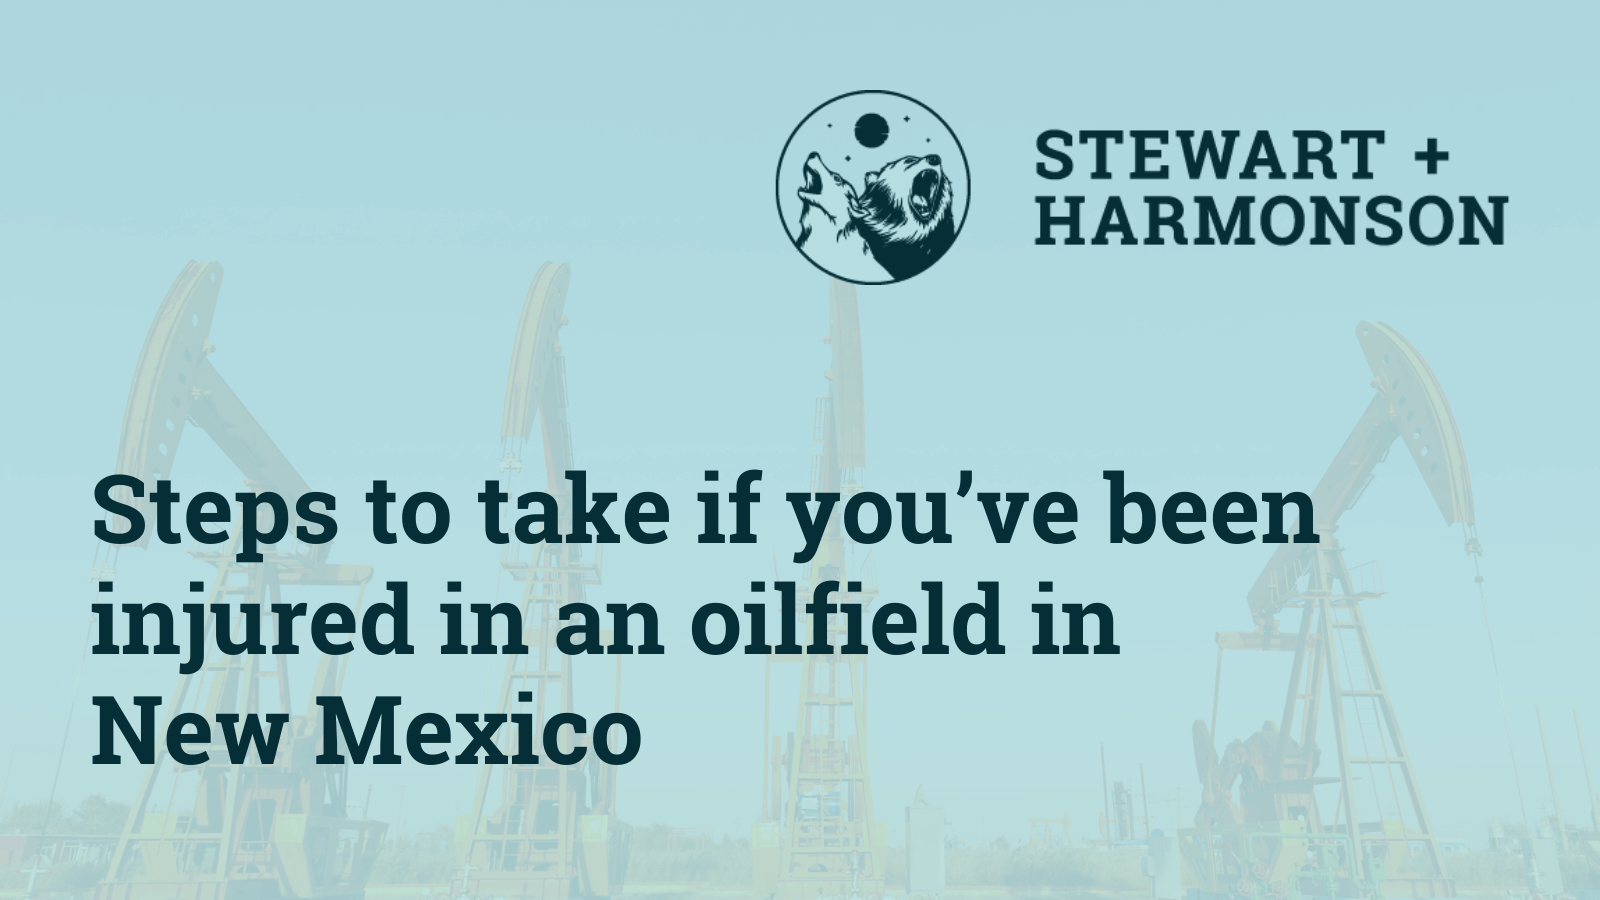 Steps to take if you’ve been injured in an oilfield in New Mexico - Stewart Harmonson Law Firm - New Mexico